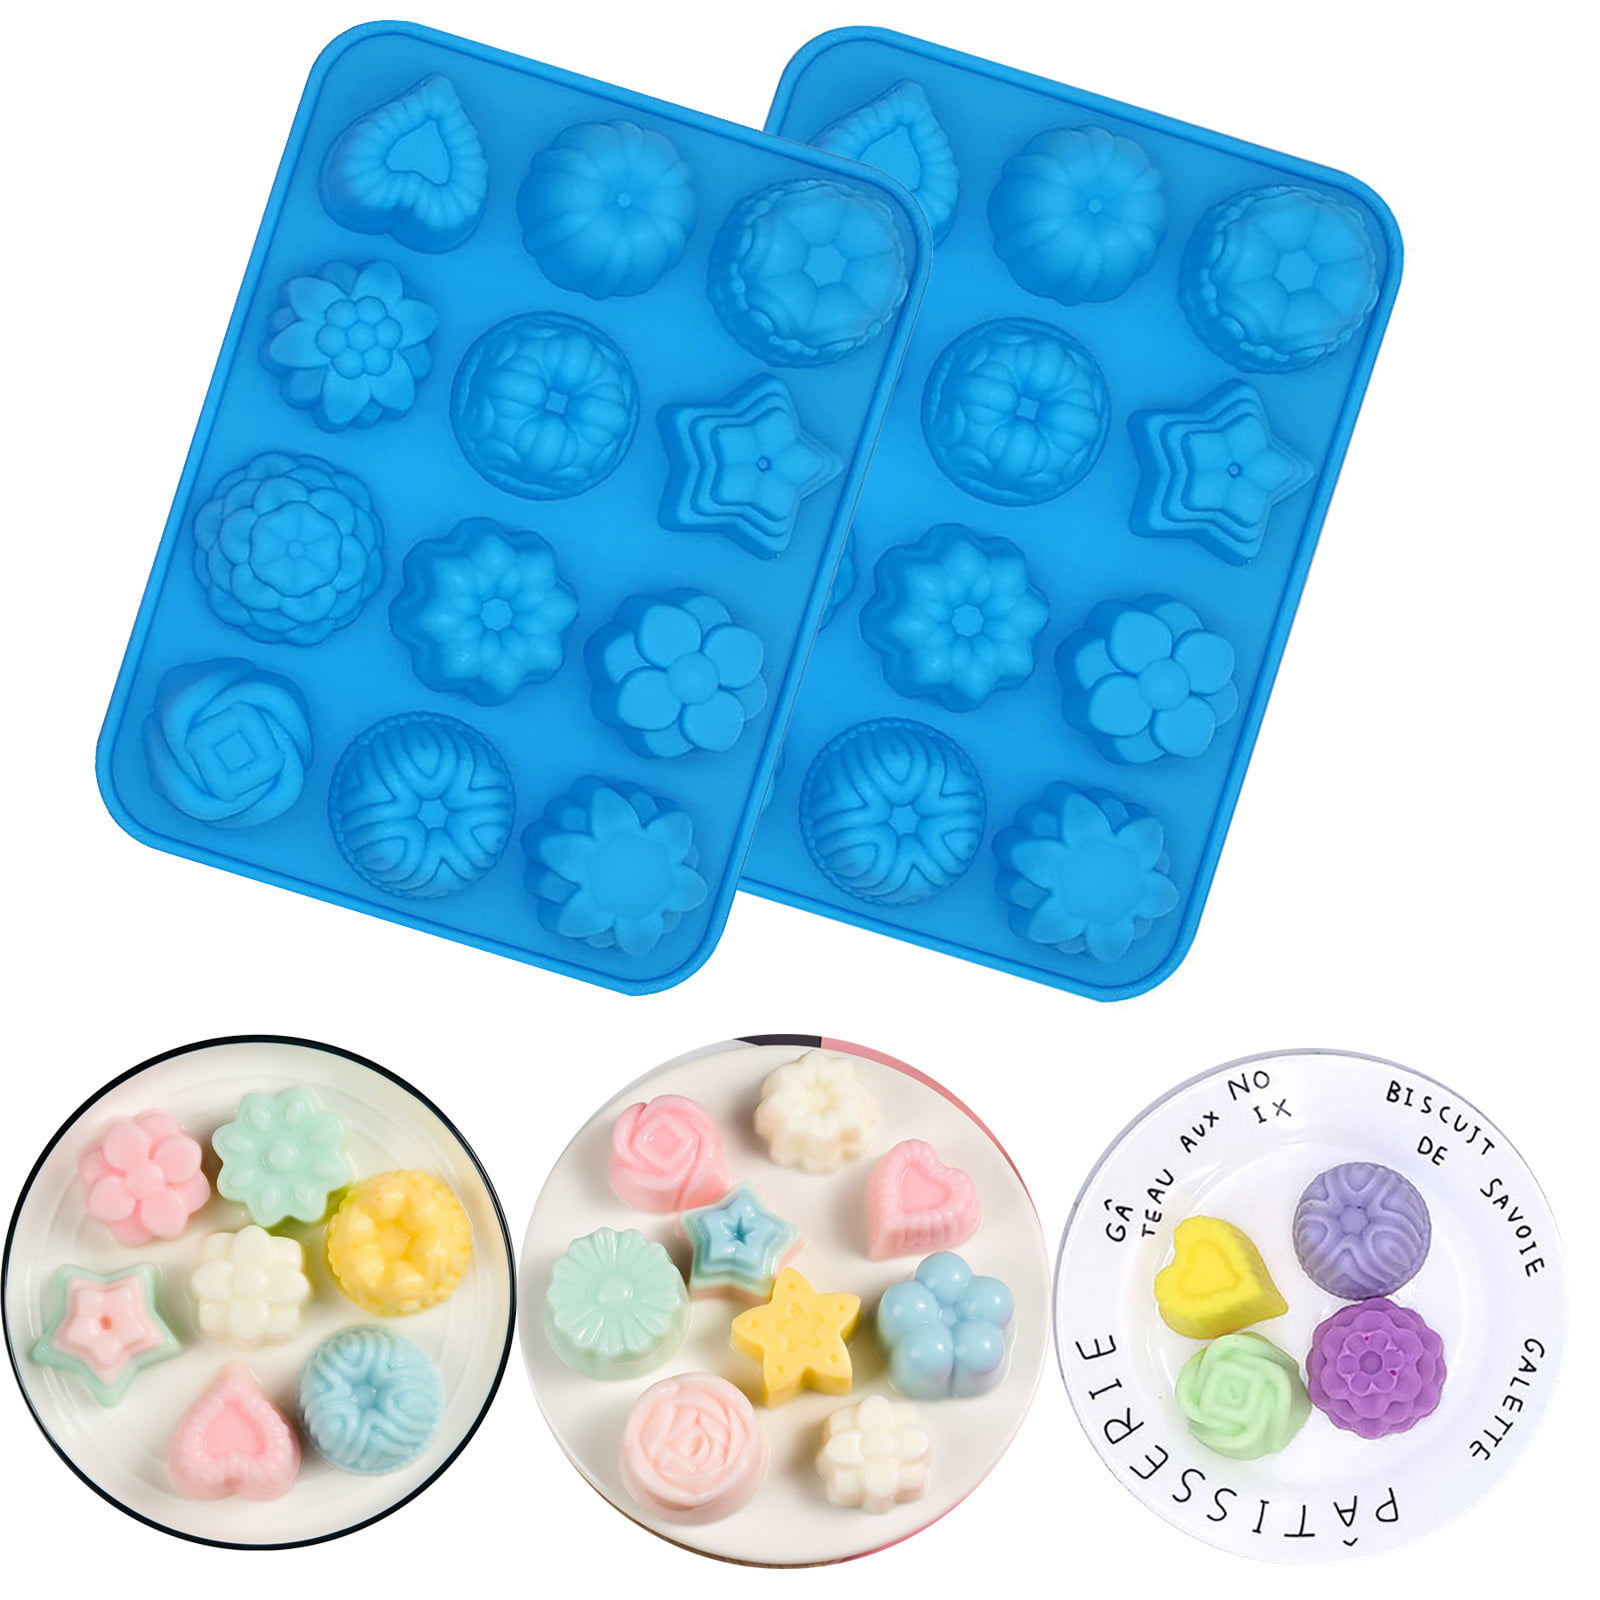 Silicone Emoji Cavities Cake Chocolate Cookie Baking Mould Mold Jell Baking Tray